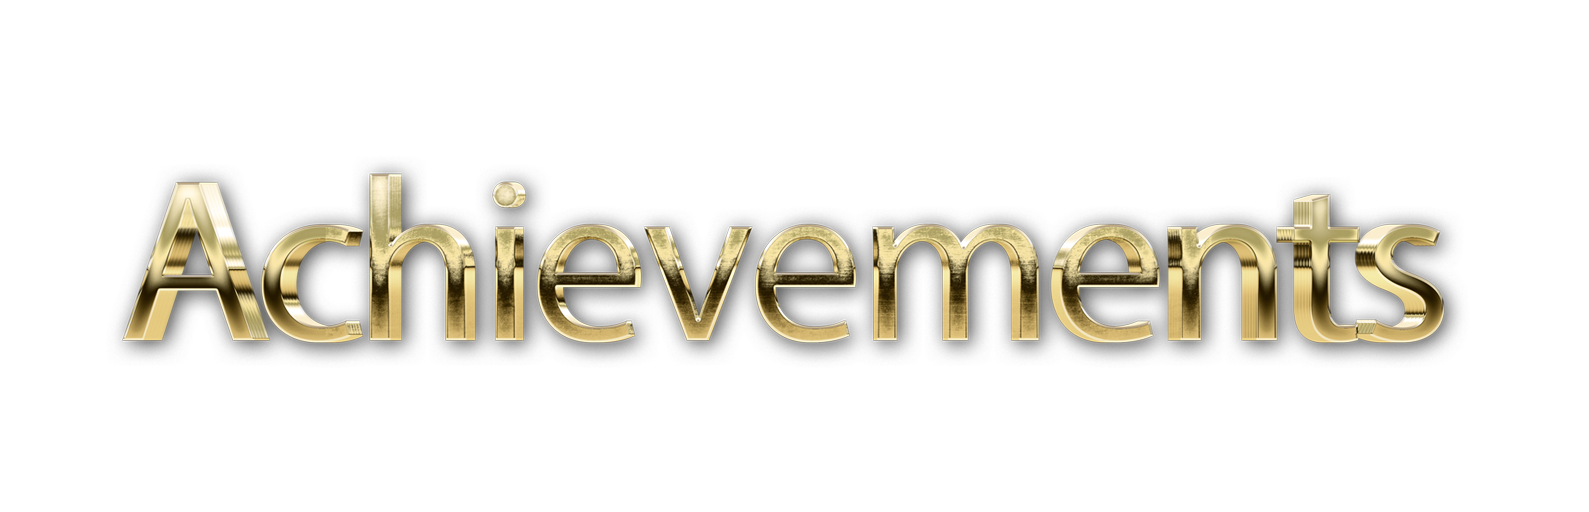 3D WORD ACHIEVEMENTS gold text effects art typography PNG images free